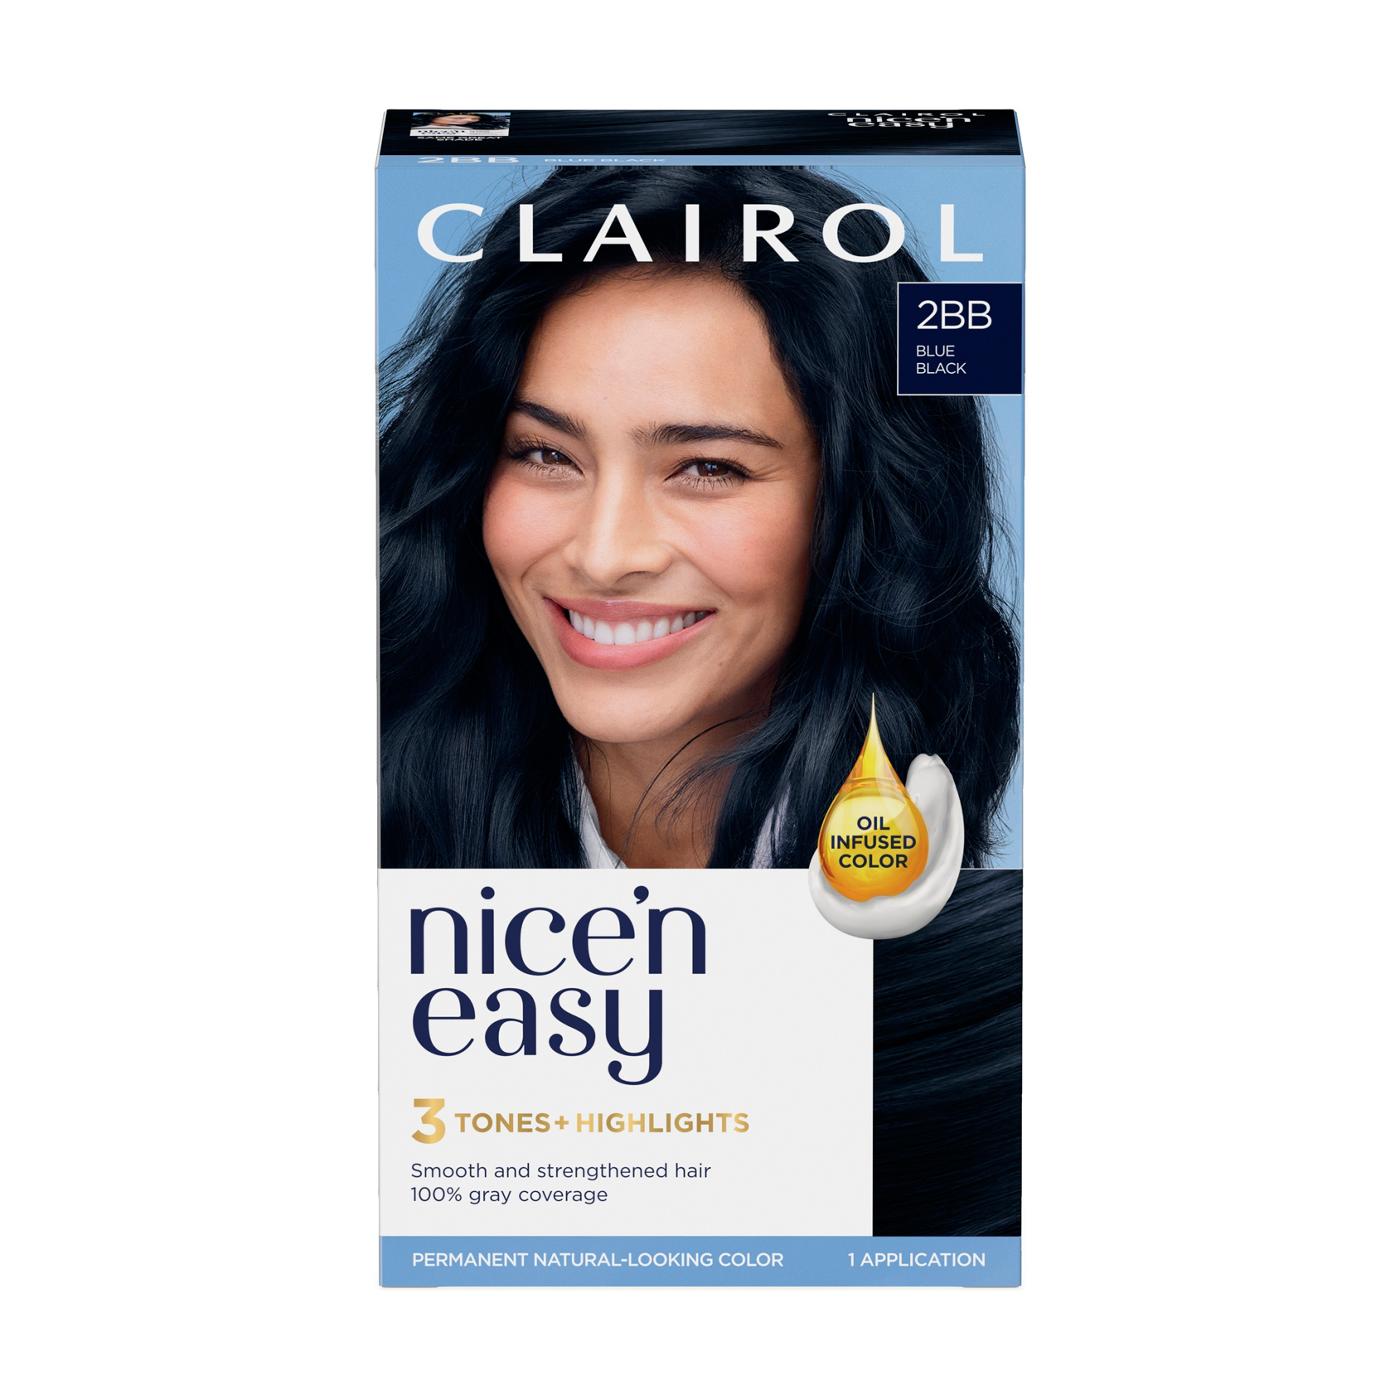 Clairol Nice 'N Easy Permanent Hair color - 2BB Blue Black; image 1 of 10